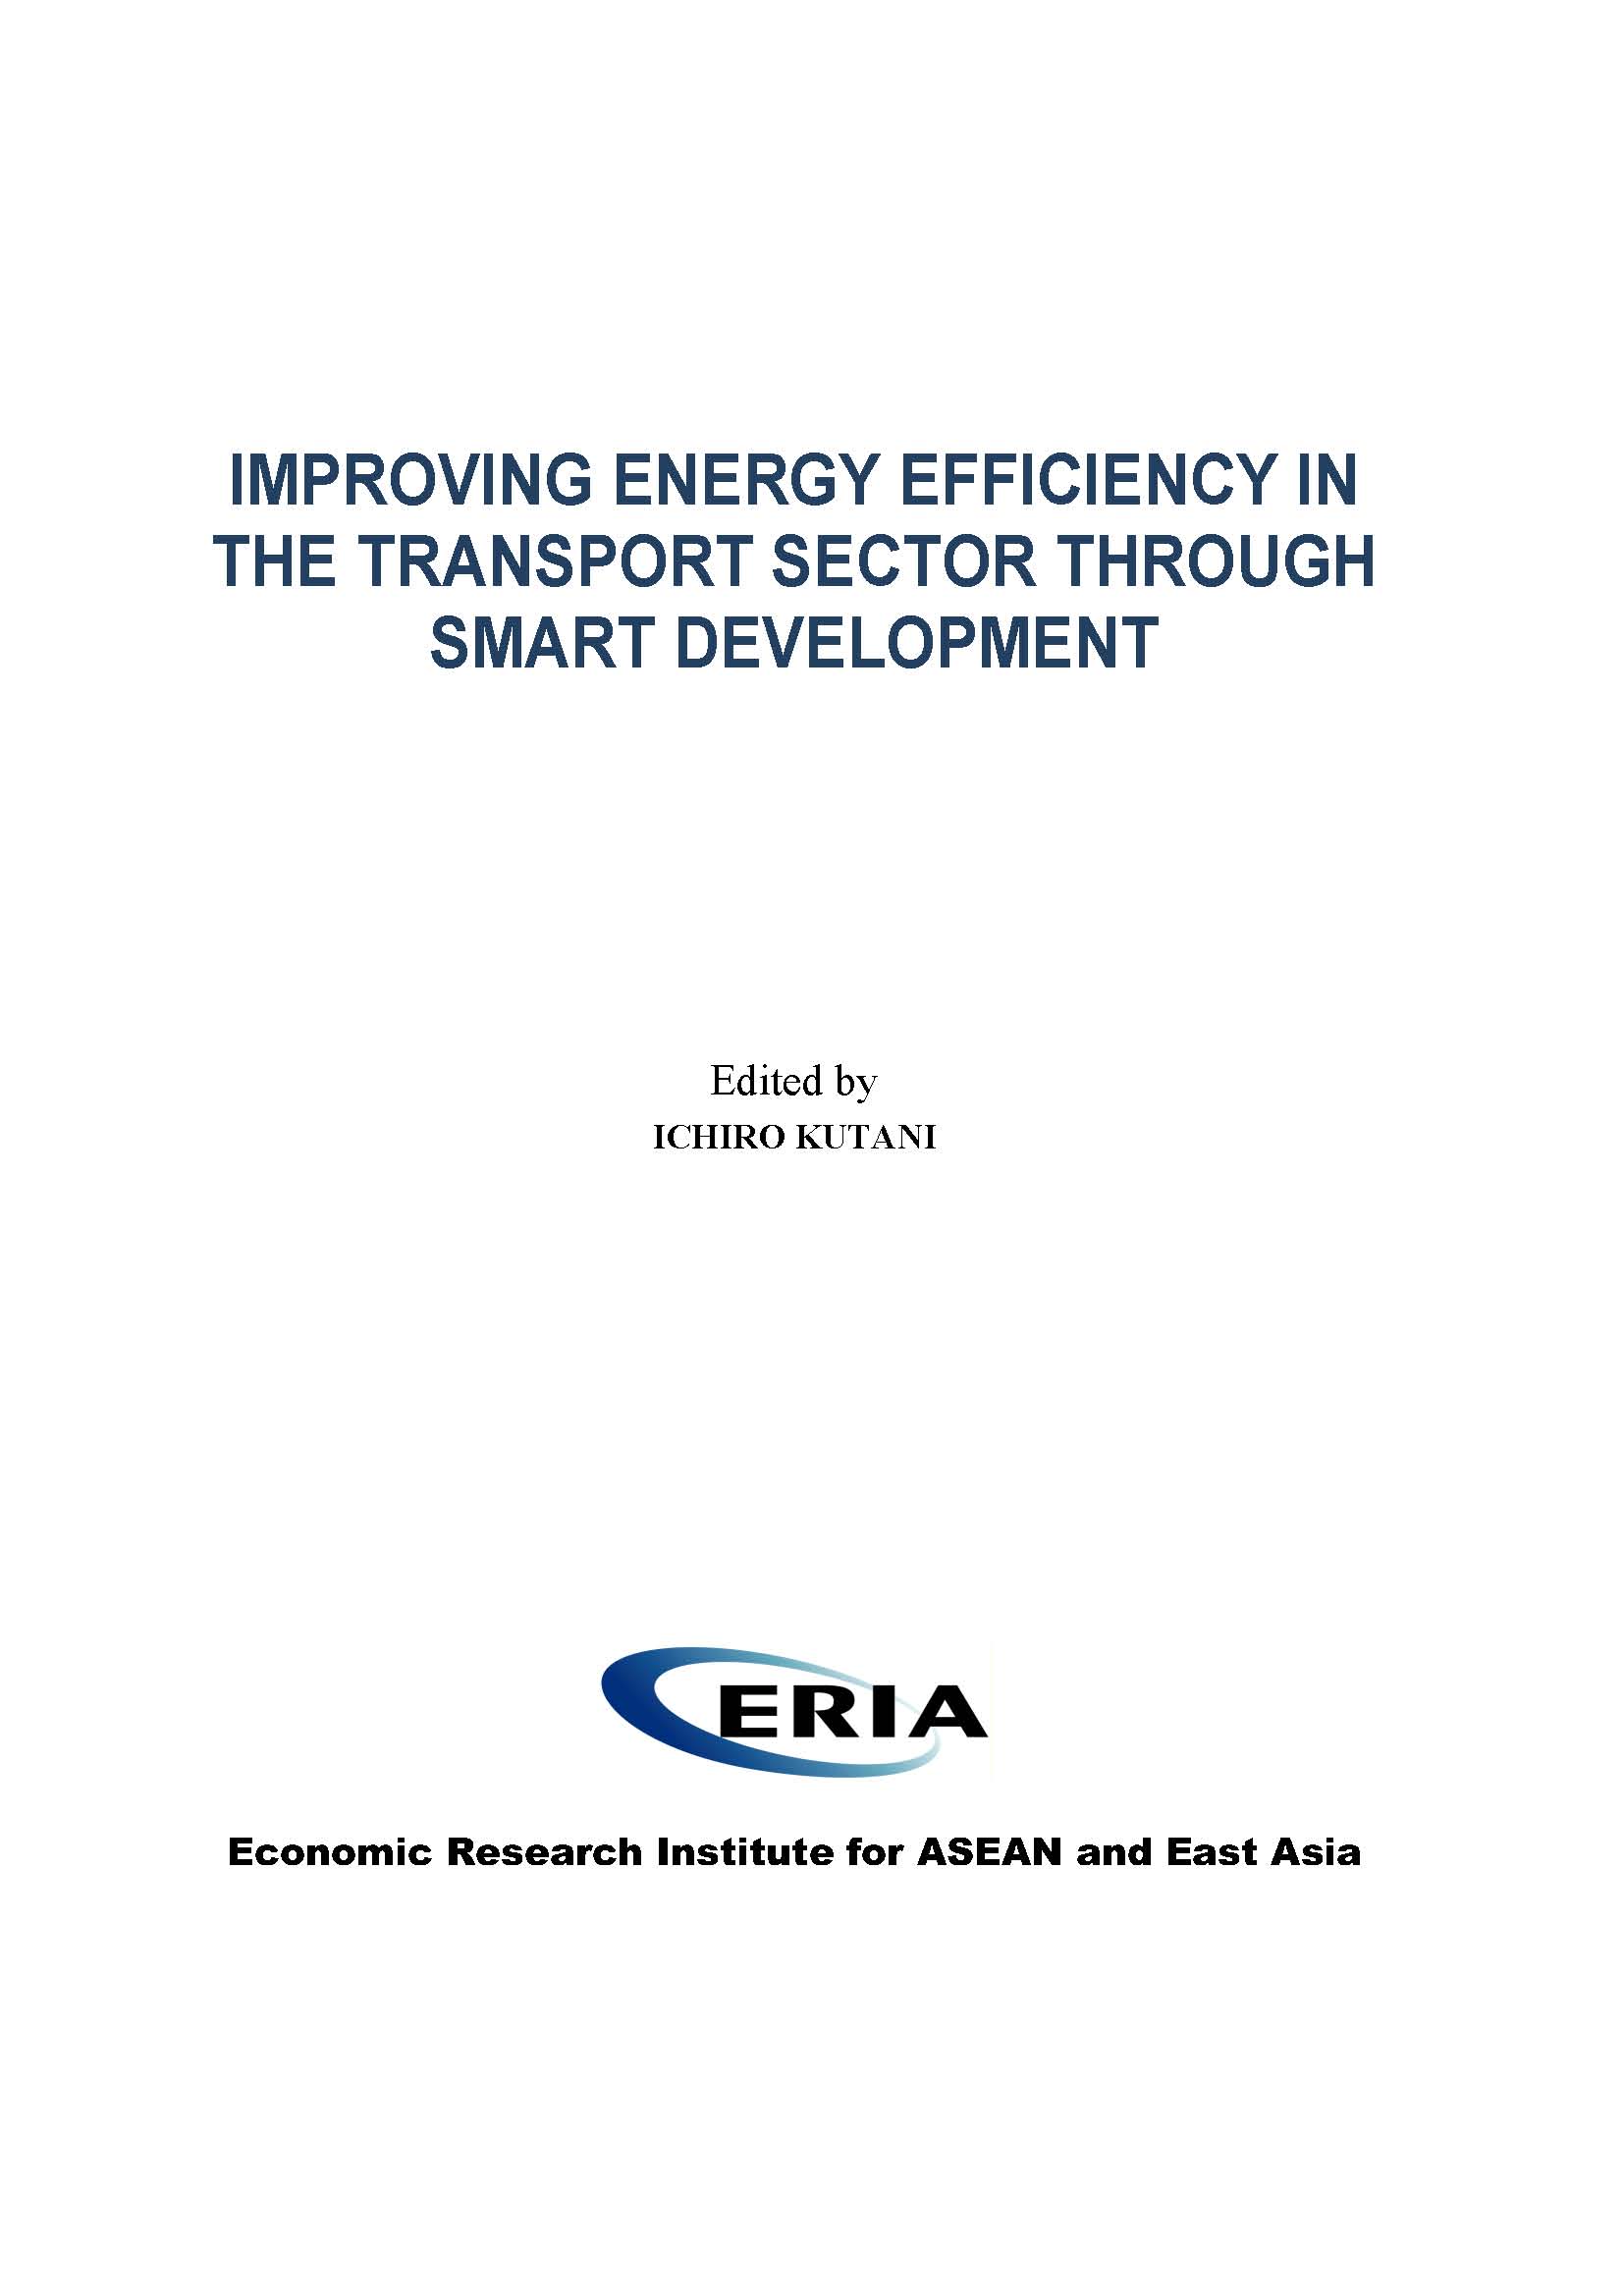 Improving Energy Efficiency in the Transport Sector through Smart Development